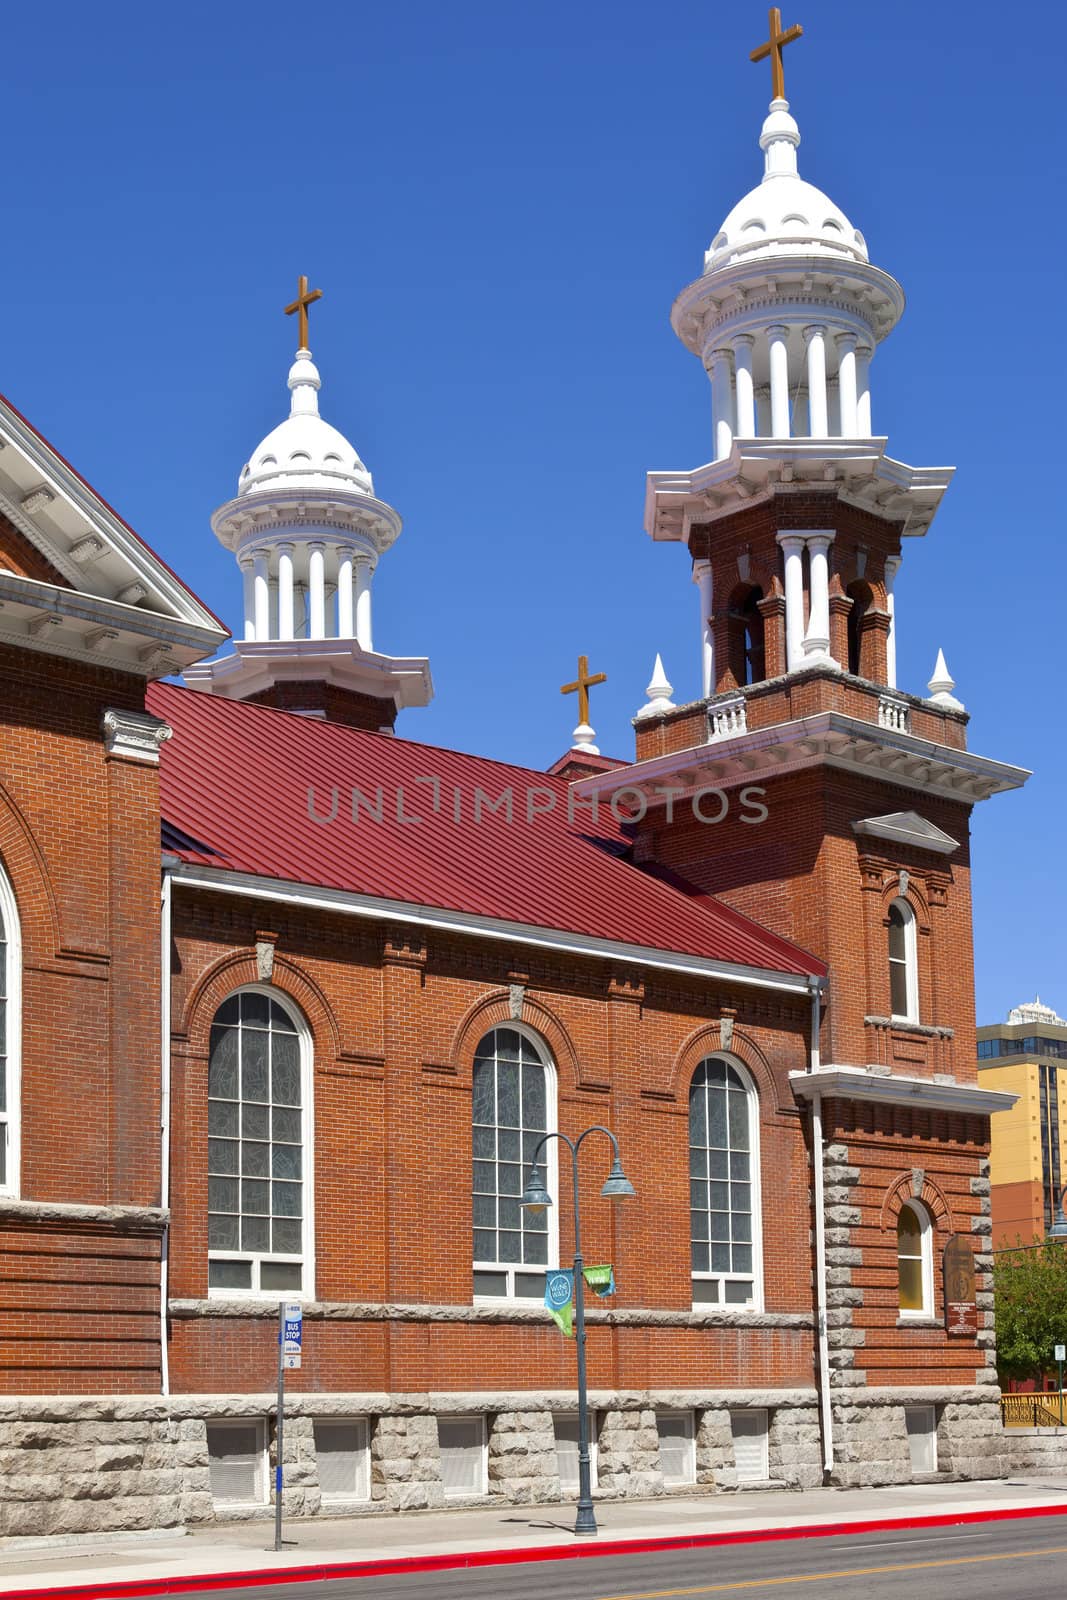 Church steeple and crosses, Reno NV. by Rigucci